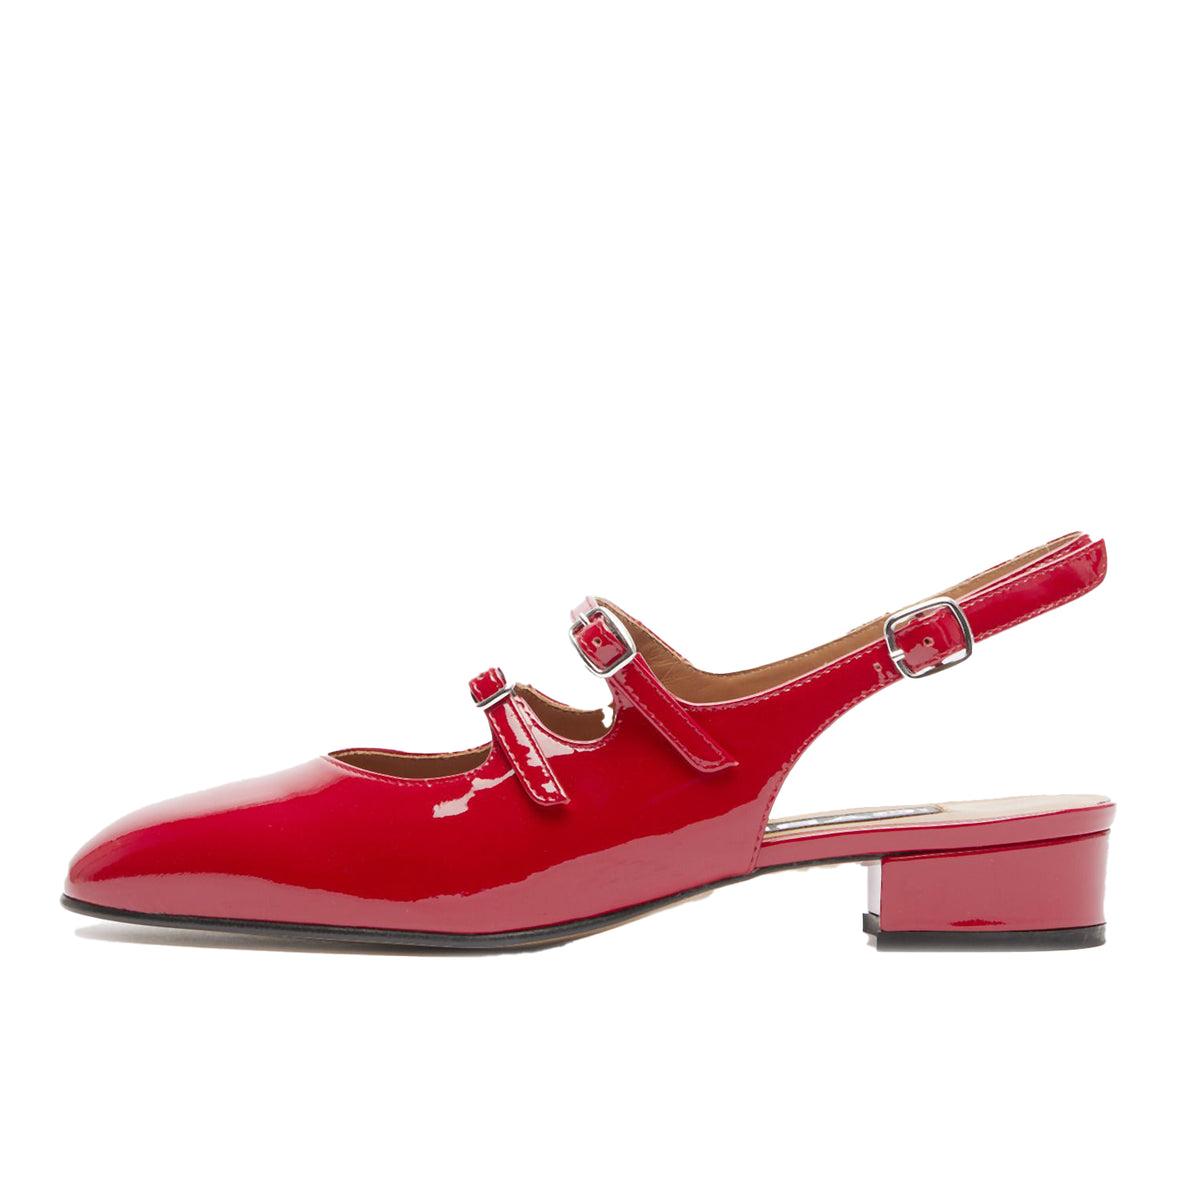 Peche Red Patent Leather Mary Jane Slingback Pumps | Carel ...